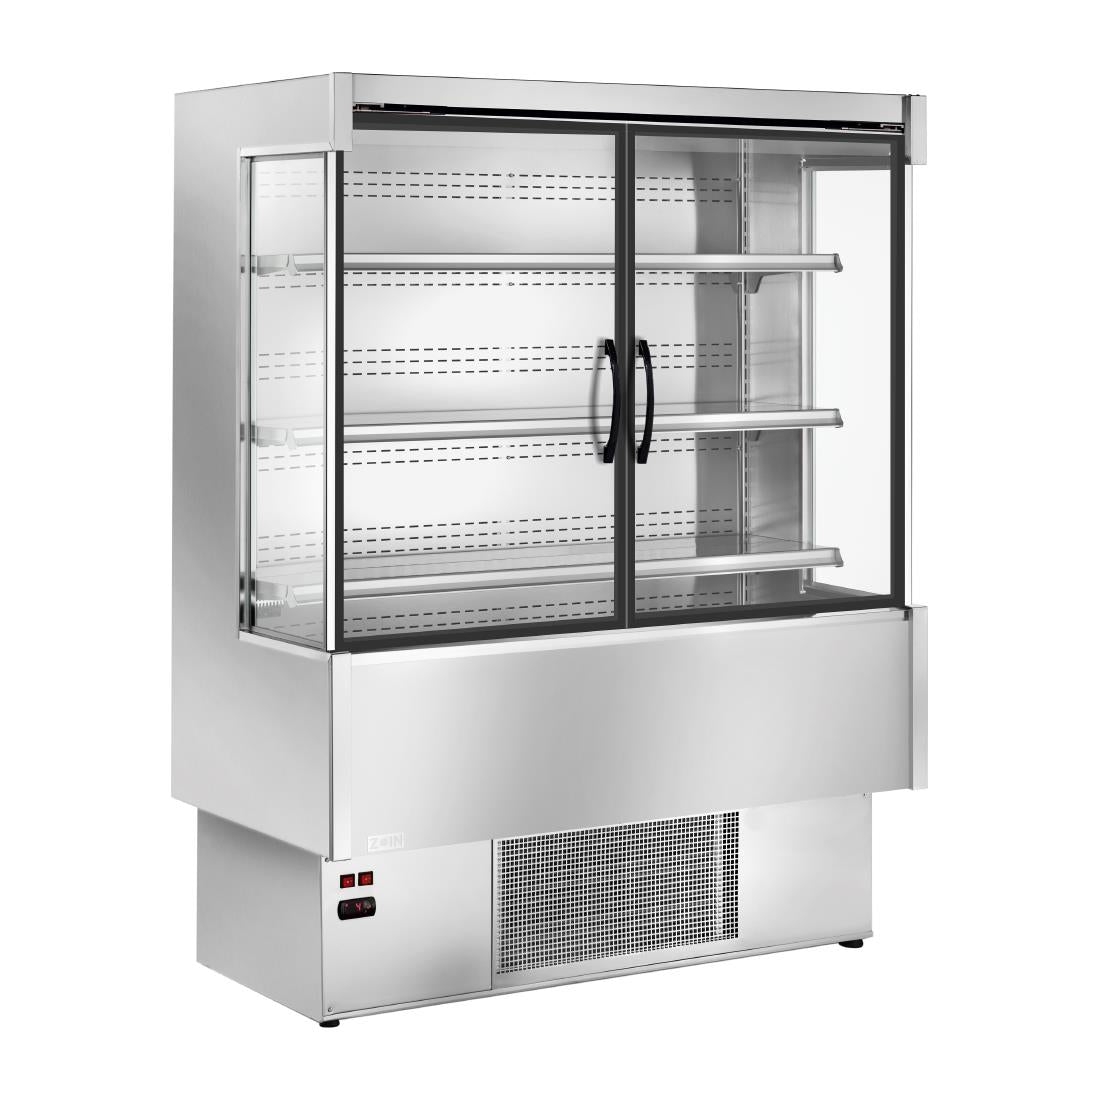 UA057-100 Zoin Silver Multideck Display Stainless Steel Finish with Hinged Doors 1000mm